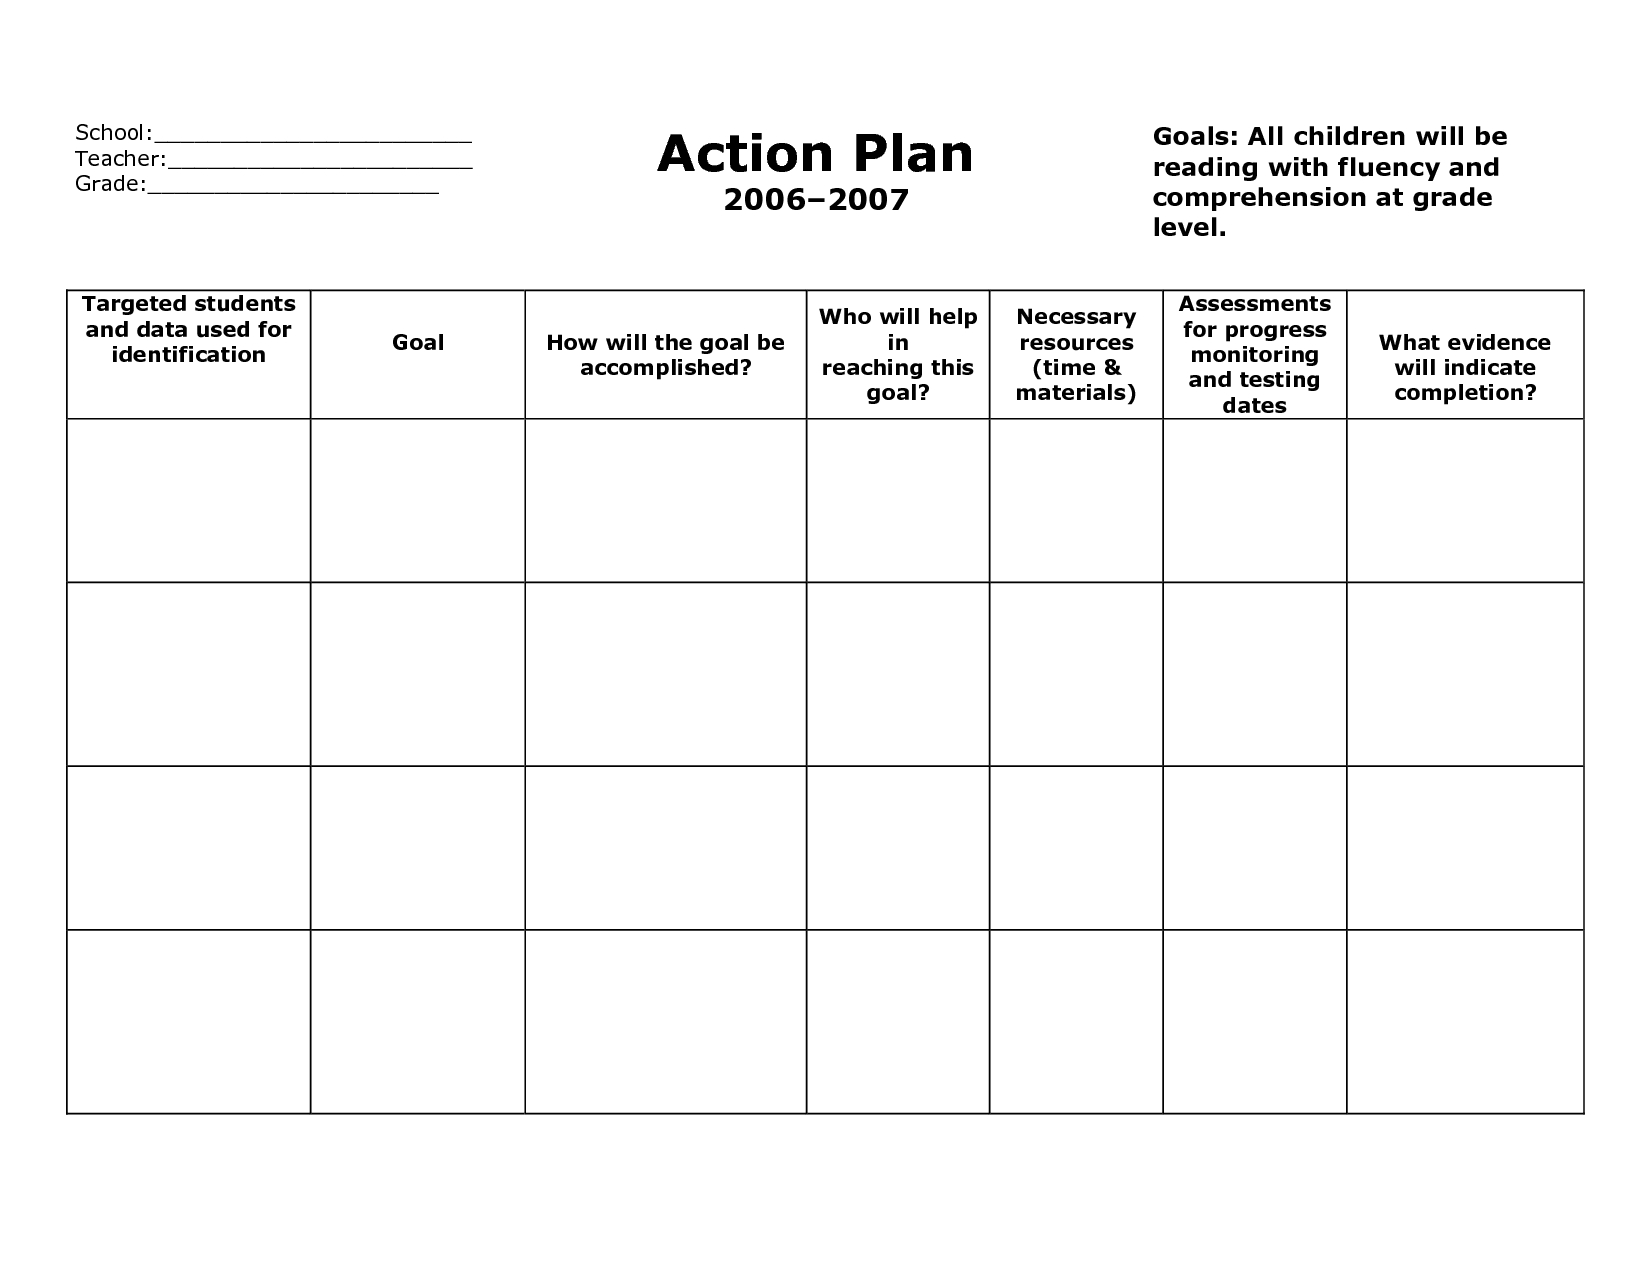 Weekly Plan Book Templates For Teachers School Action Plan